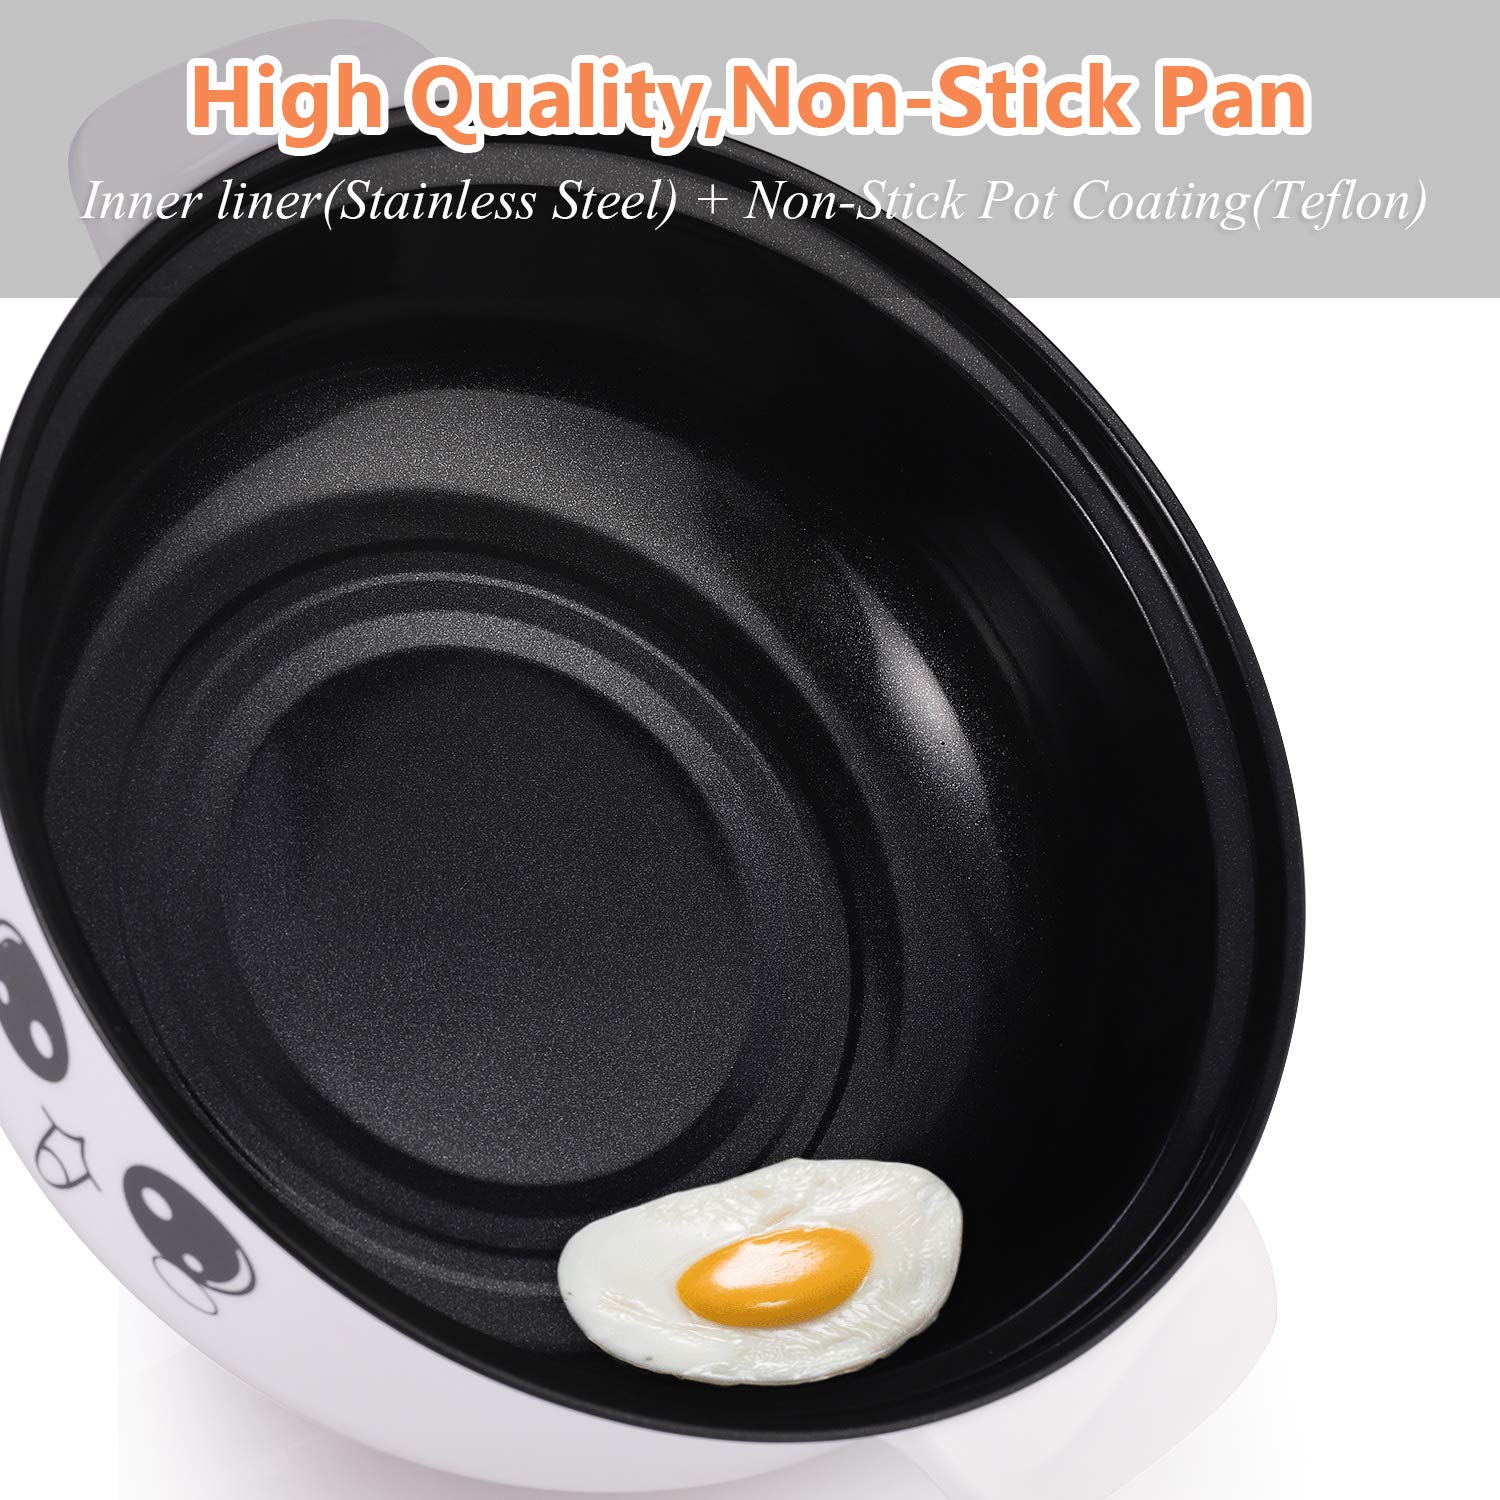 MINGPINHUIUS 4-in-1 Multifunction Electric Cooker Skillet Wok Electric Hot Pot For Cook Rice Fried Noodles Stew Soup Steamed Fish Boiled Egg Small Non-stick with Lid (3.6L, without Steamer)